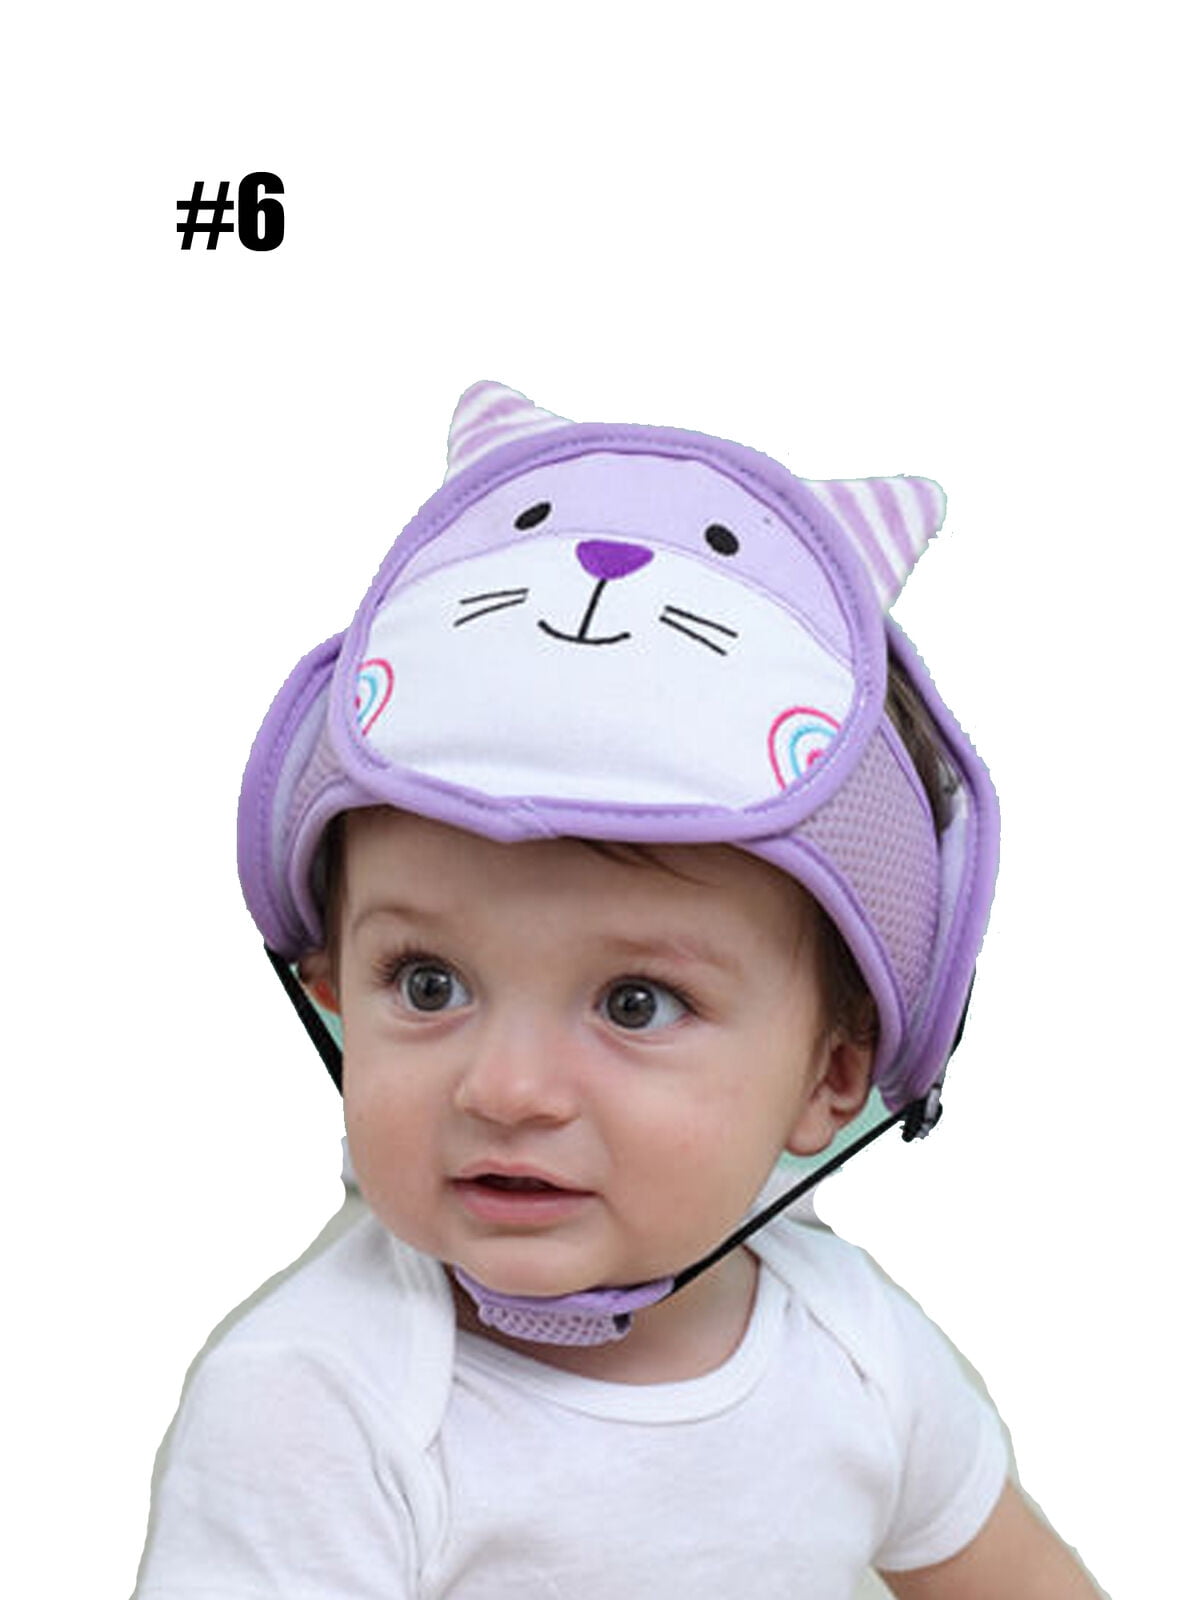 Cathery Cathery Infant Baby Toddler Safety Helmet Kids Head Protection Hat For Walking Crawling Walmart Com Walmart Com